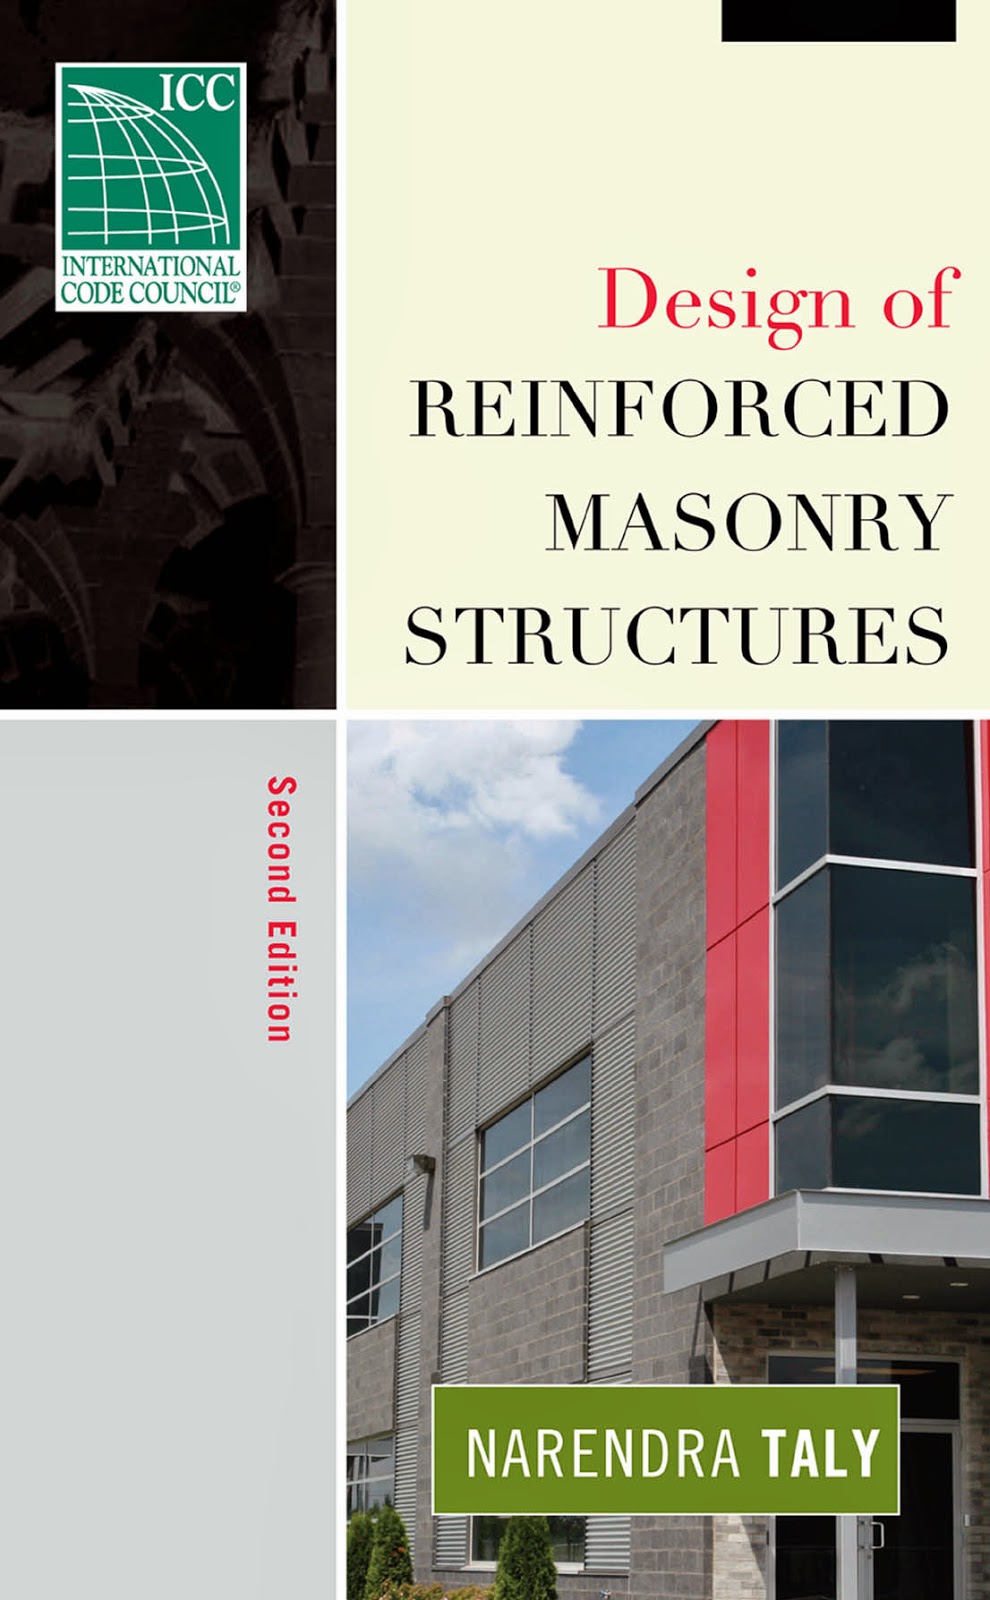 Book: Design of Reinforced Masonry Structures 2nd Edition by Narendra Taly